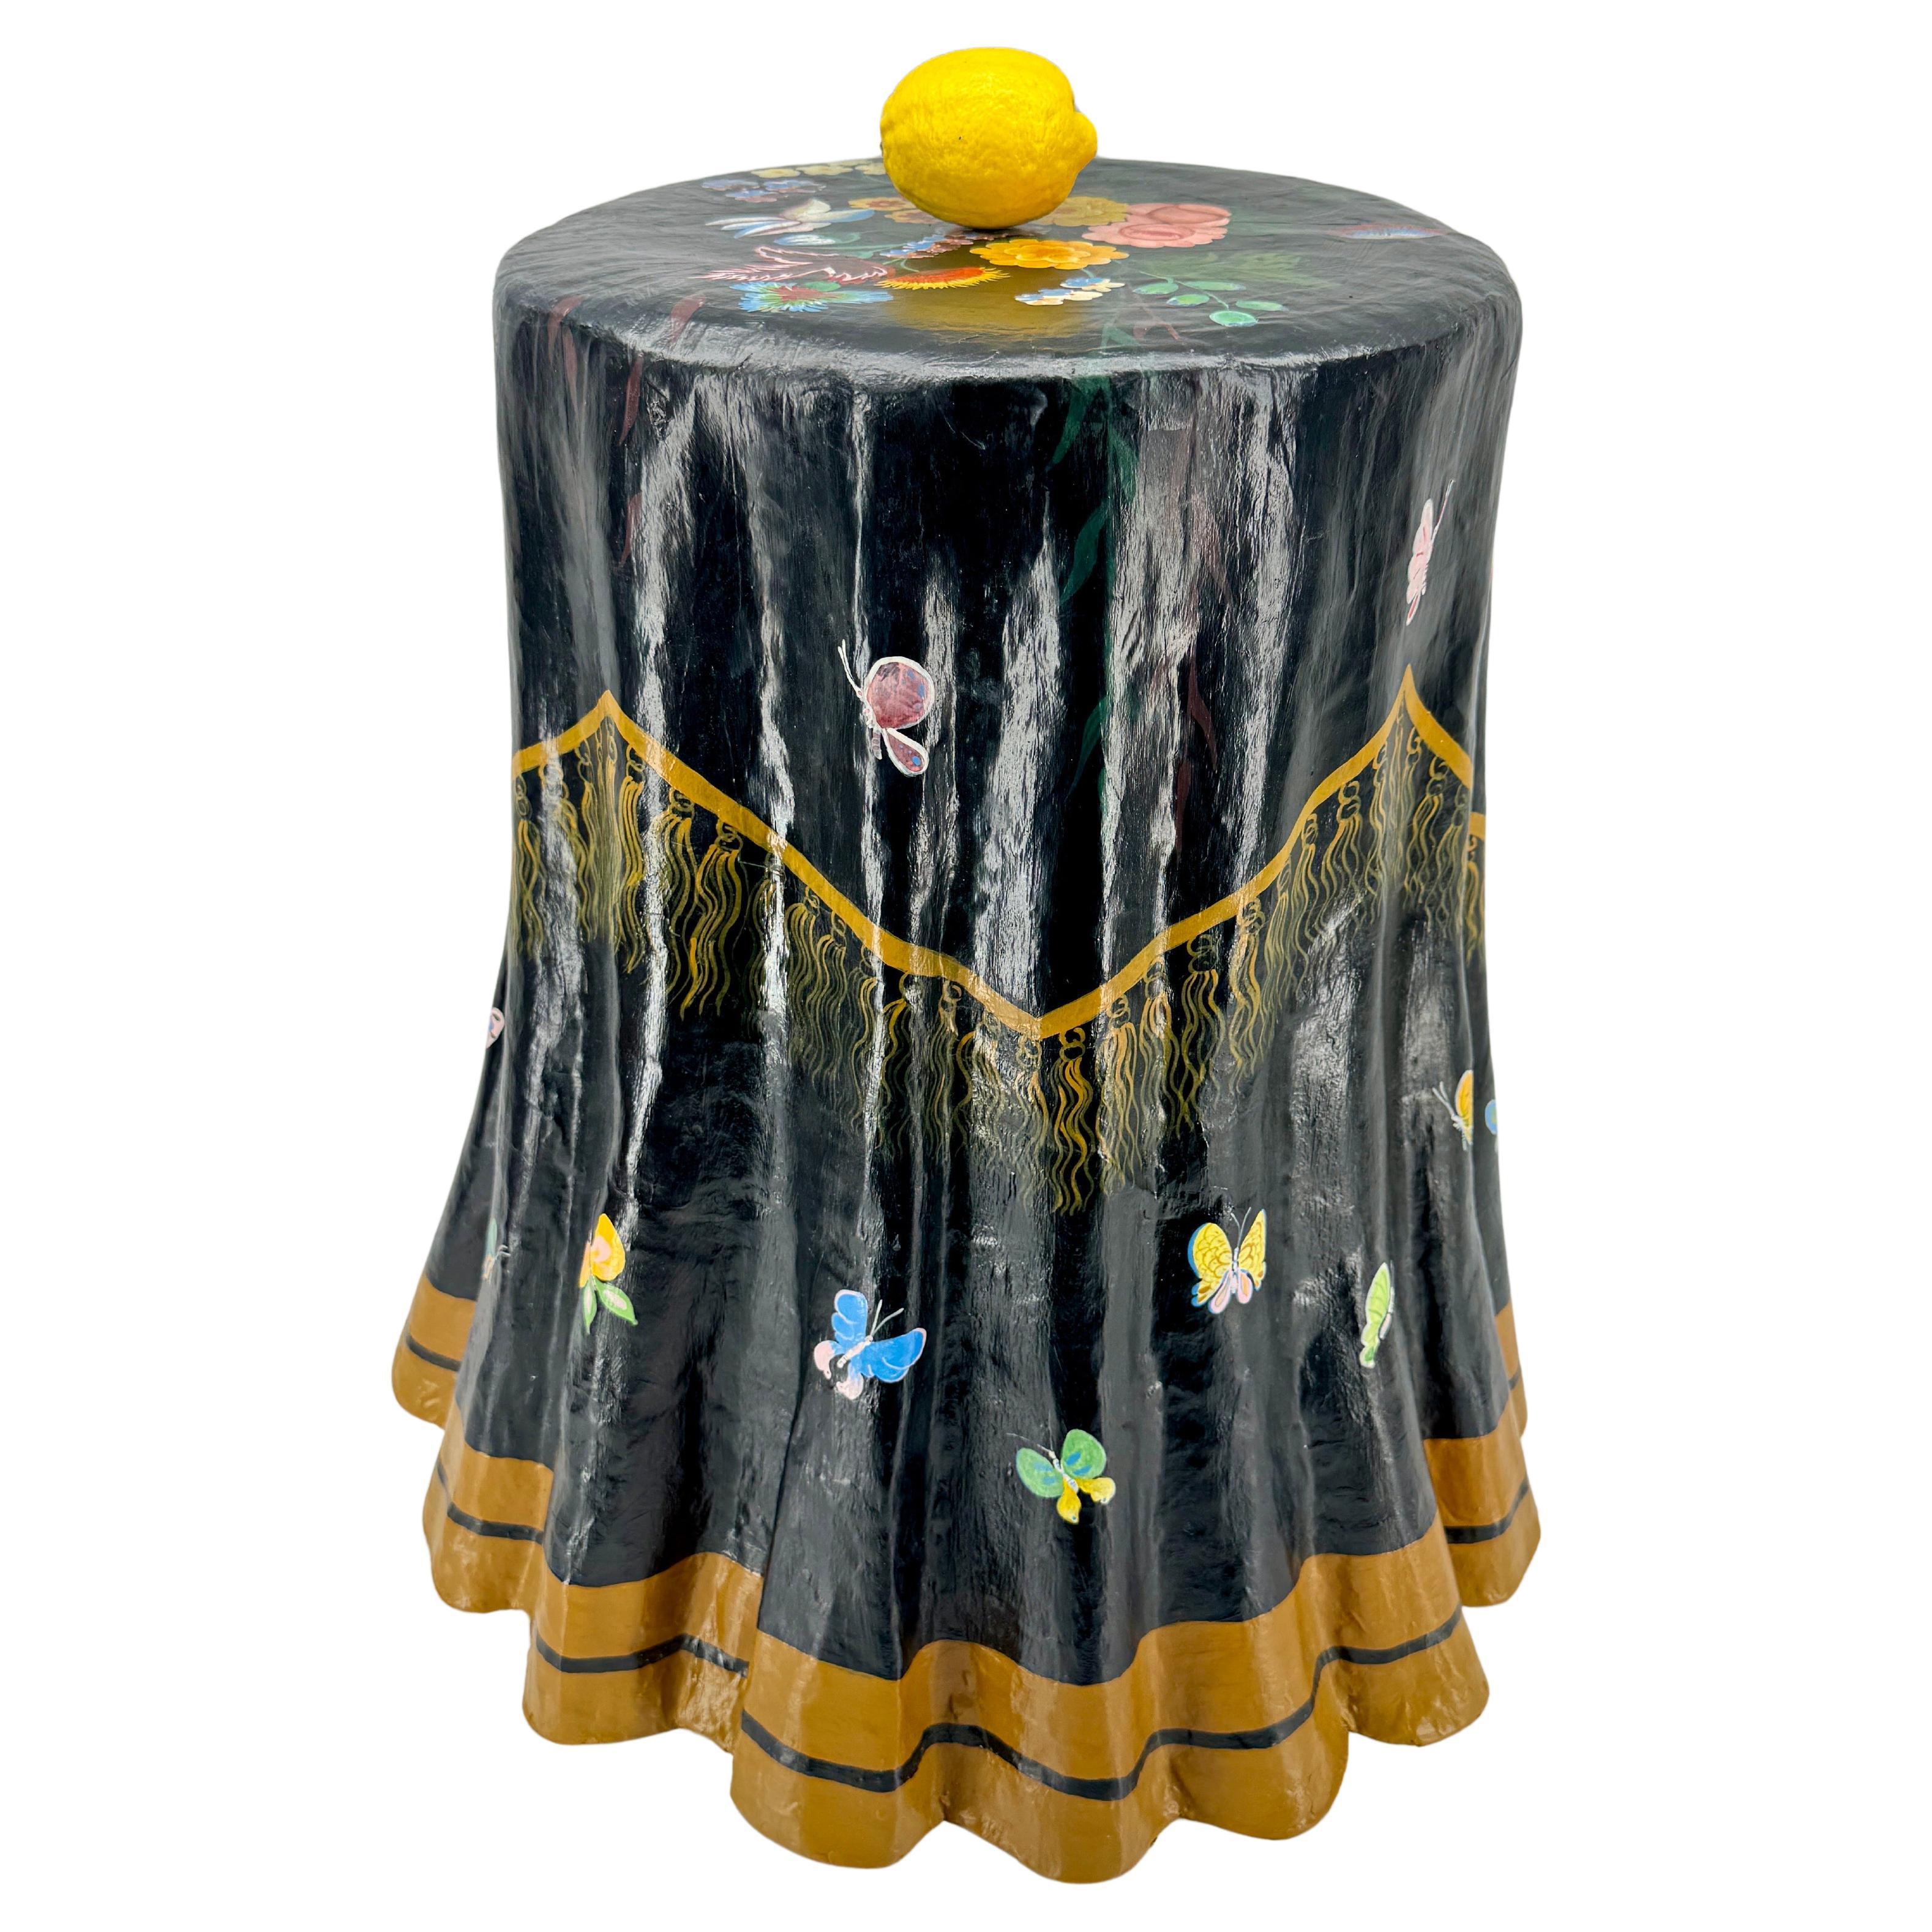 Papier Mache Black Multi-Colored Side Table
A beautiful example of elegance, a hand painted paper mache table. This side table is made to look like a tablecloth with a graceful draped effect. Decorated with hand painted flowers, butterflies and